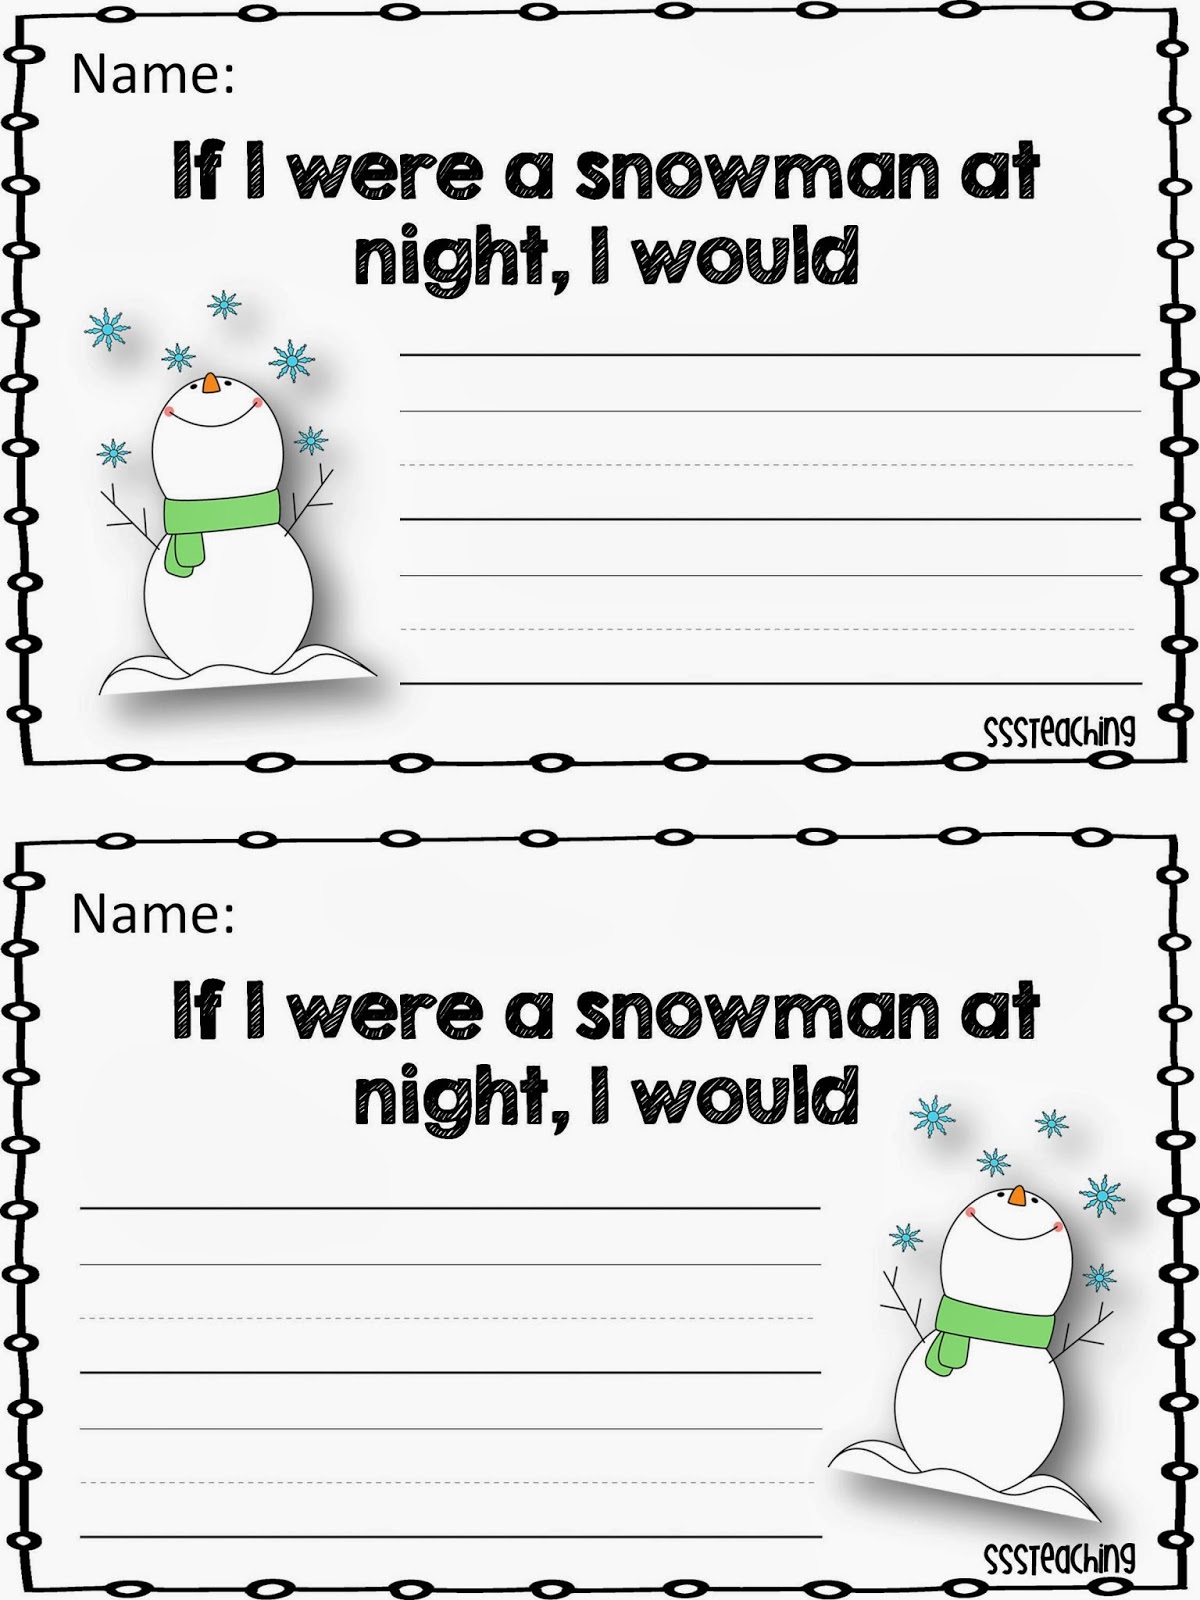 Snowmen at night writing activity for middle school